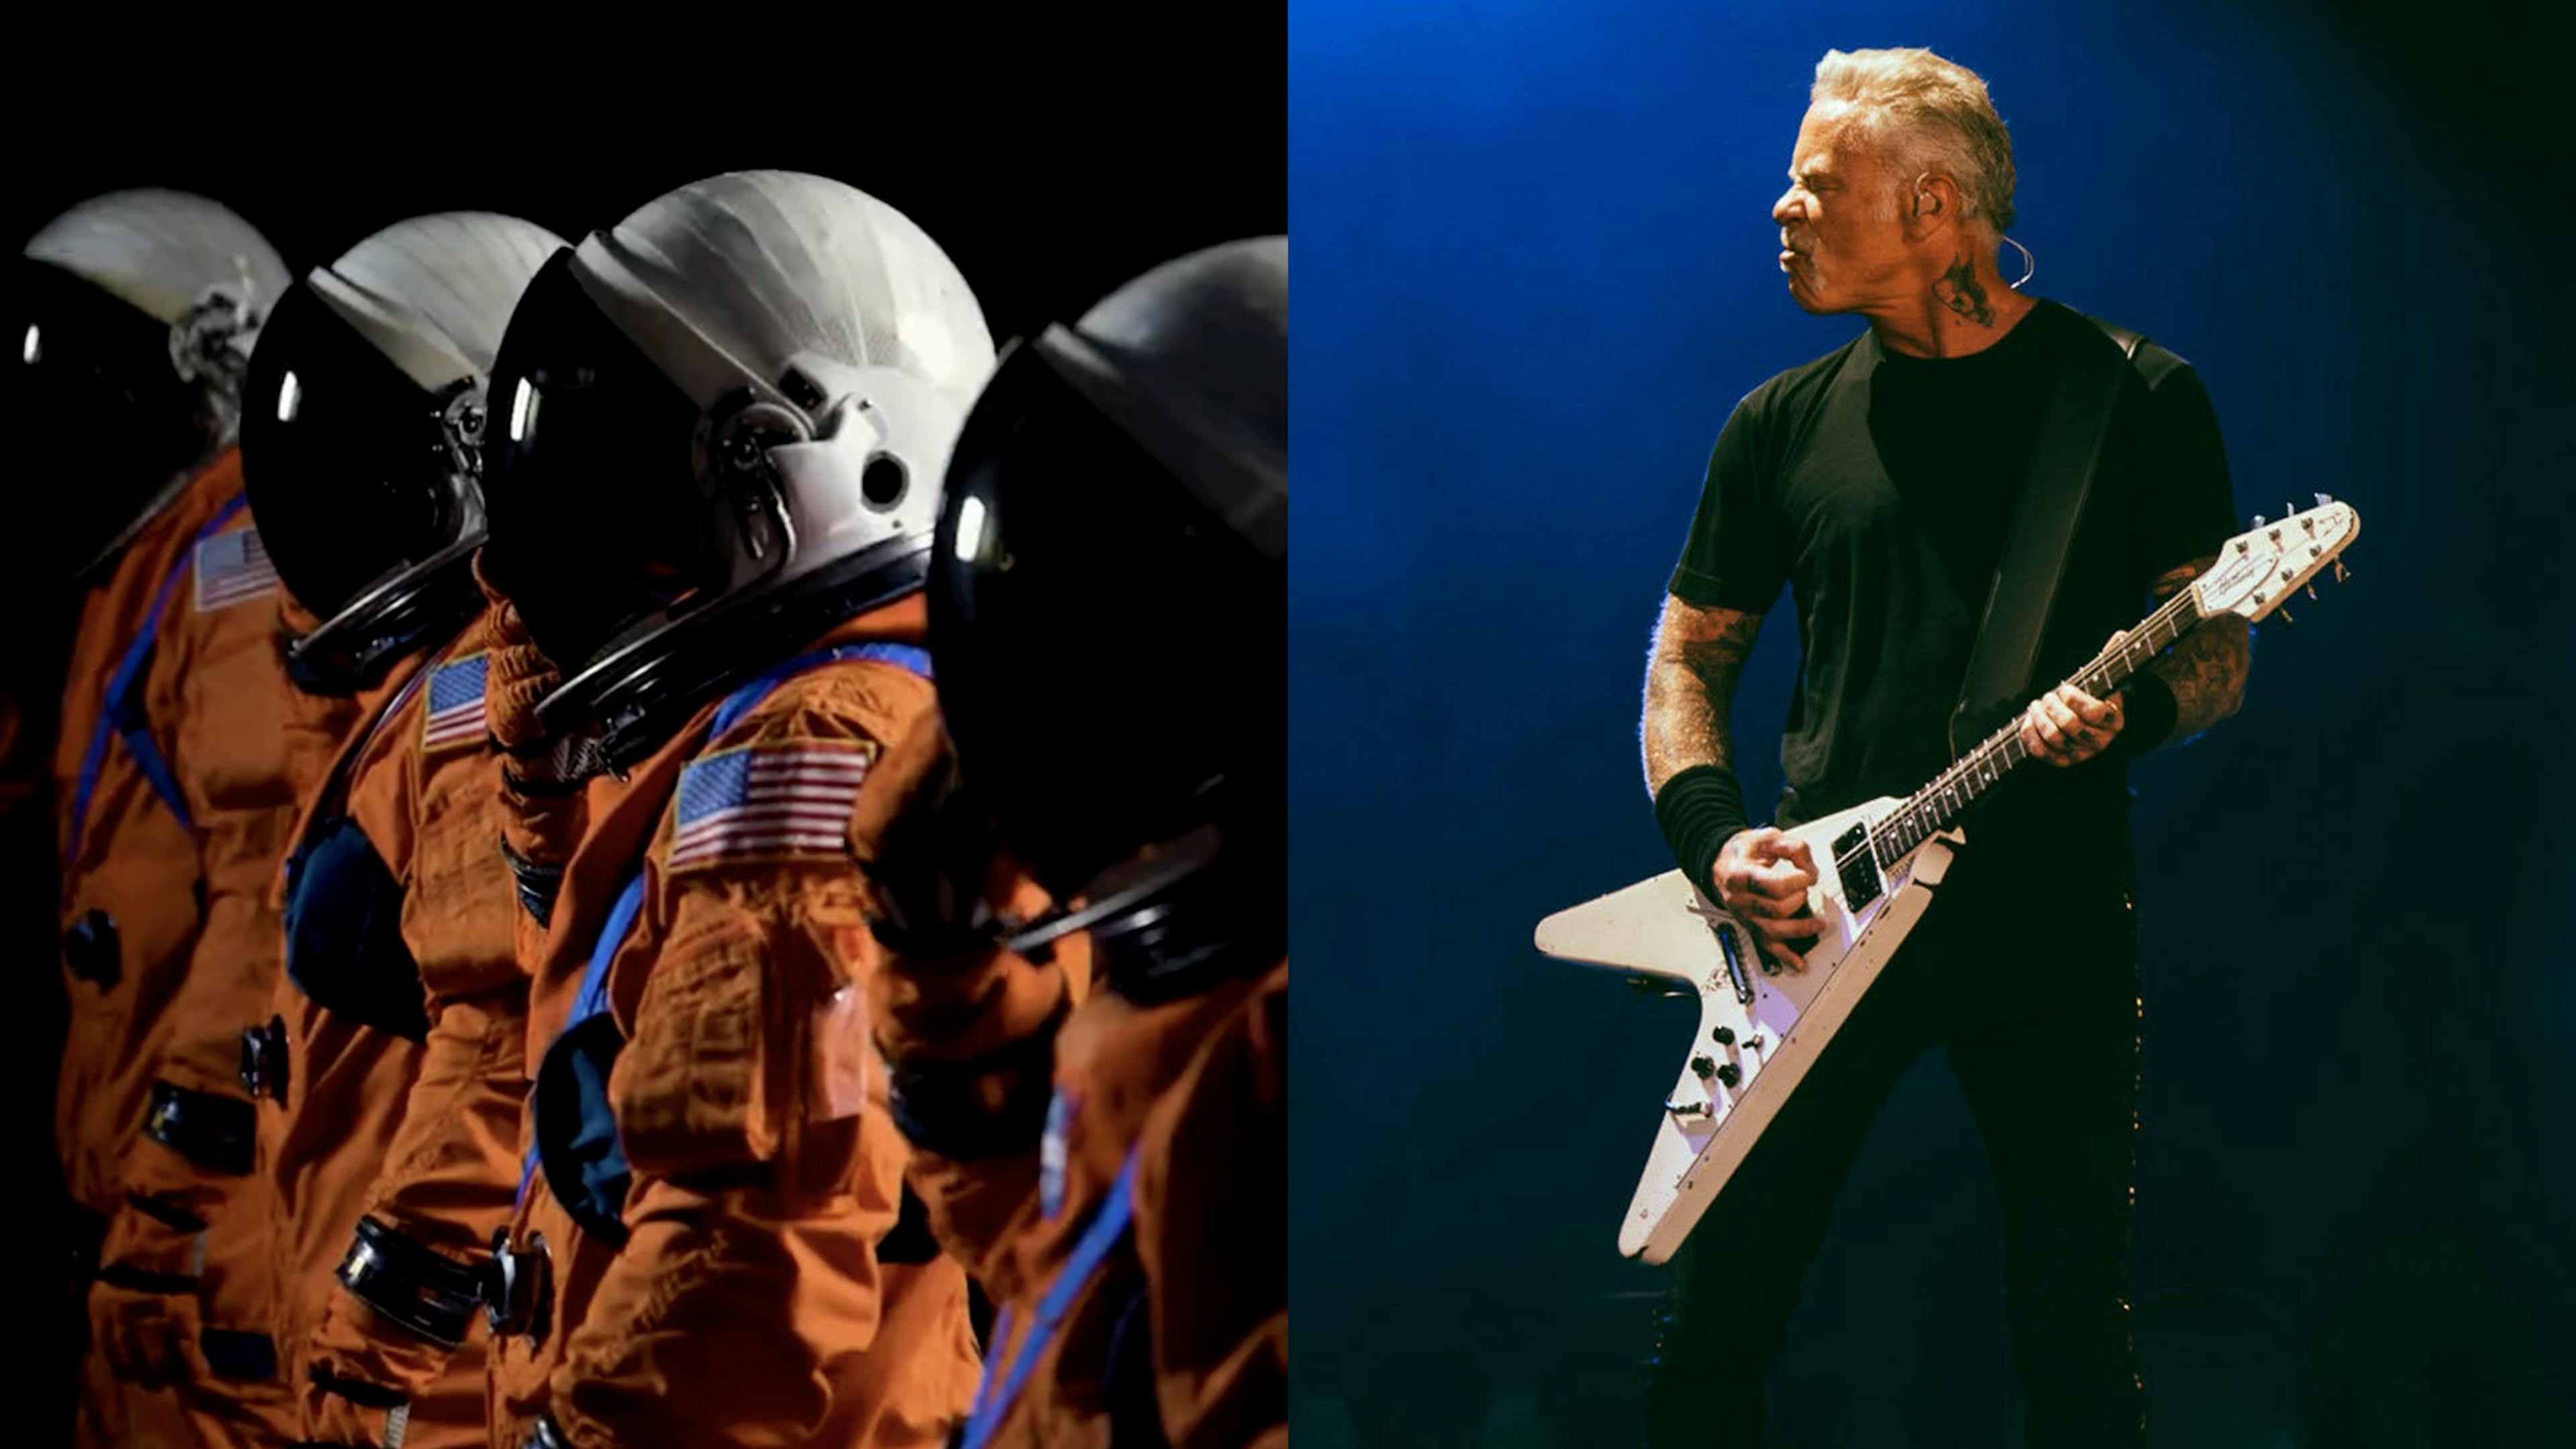 Metallica’s Fuel soundtracks the launch of NASA’s Artemis missions to the moon